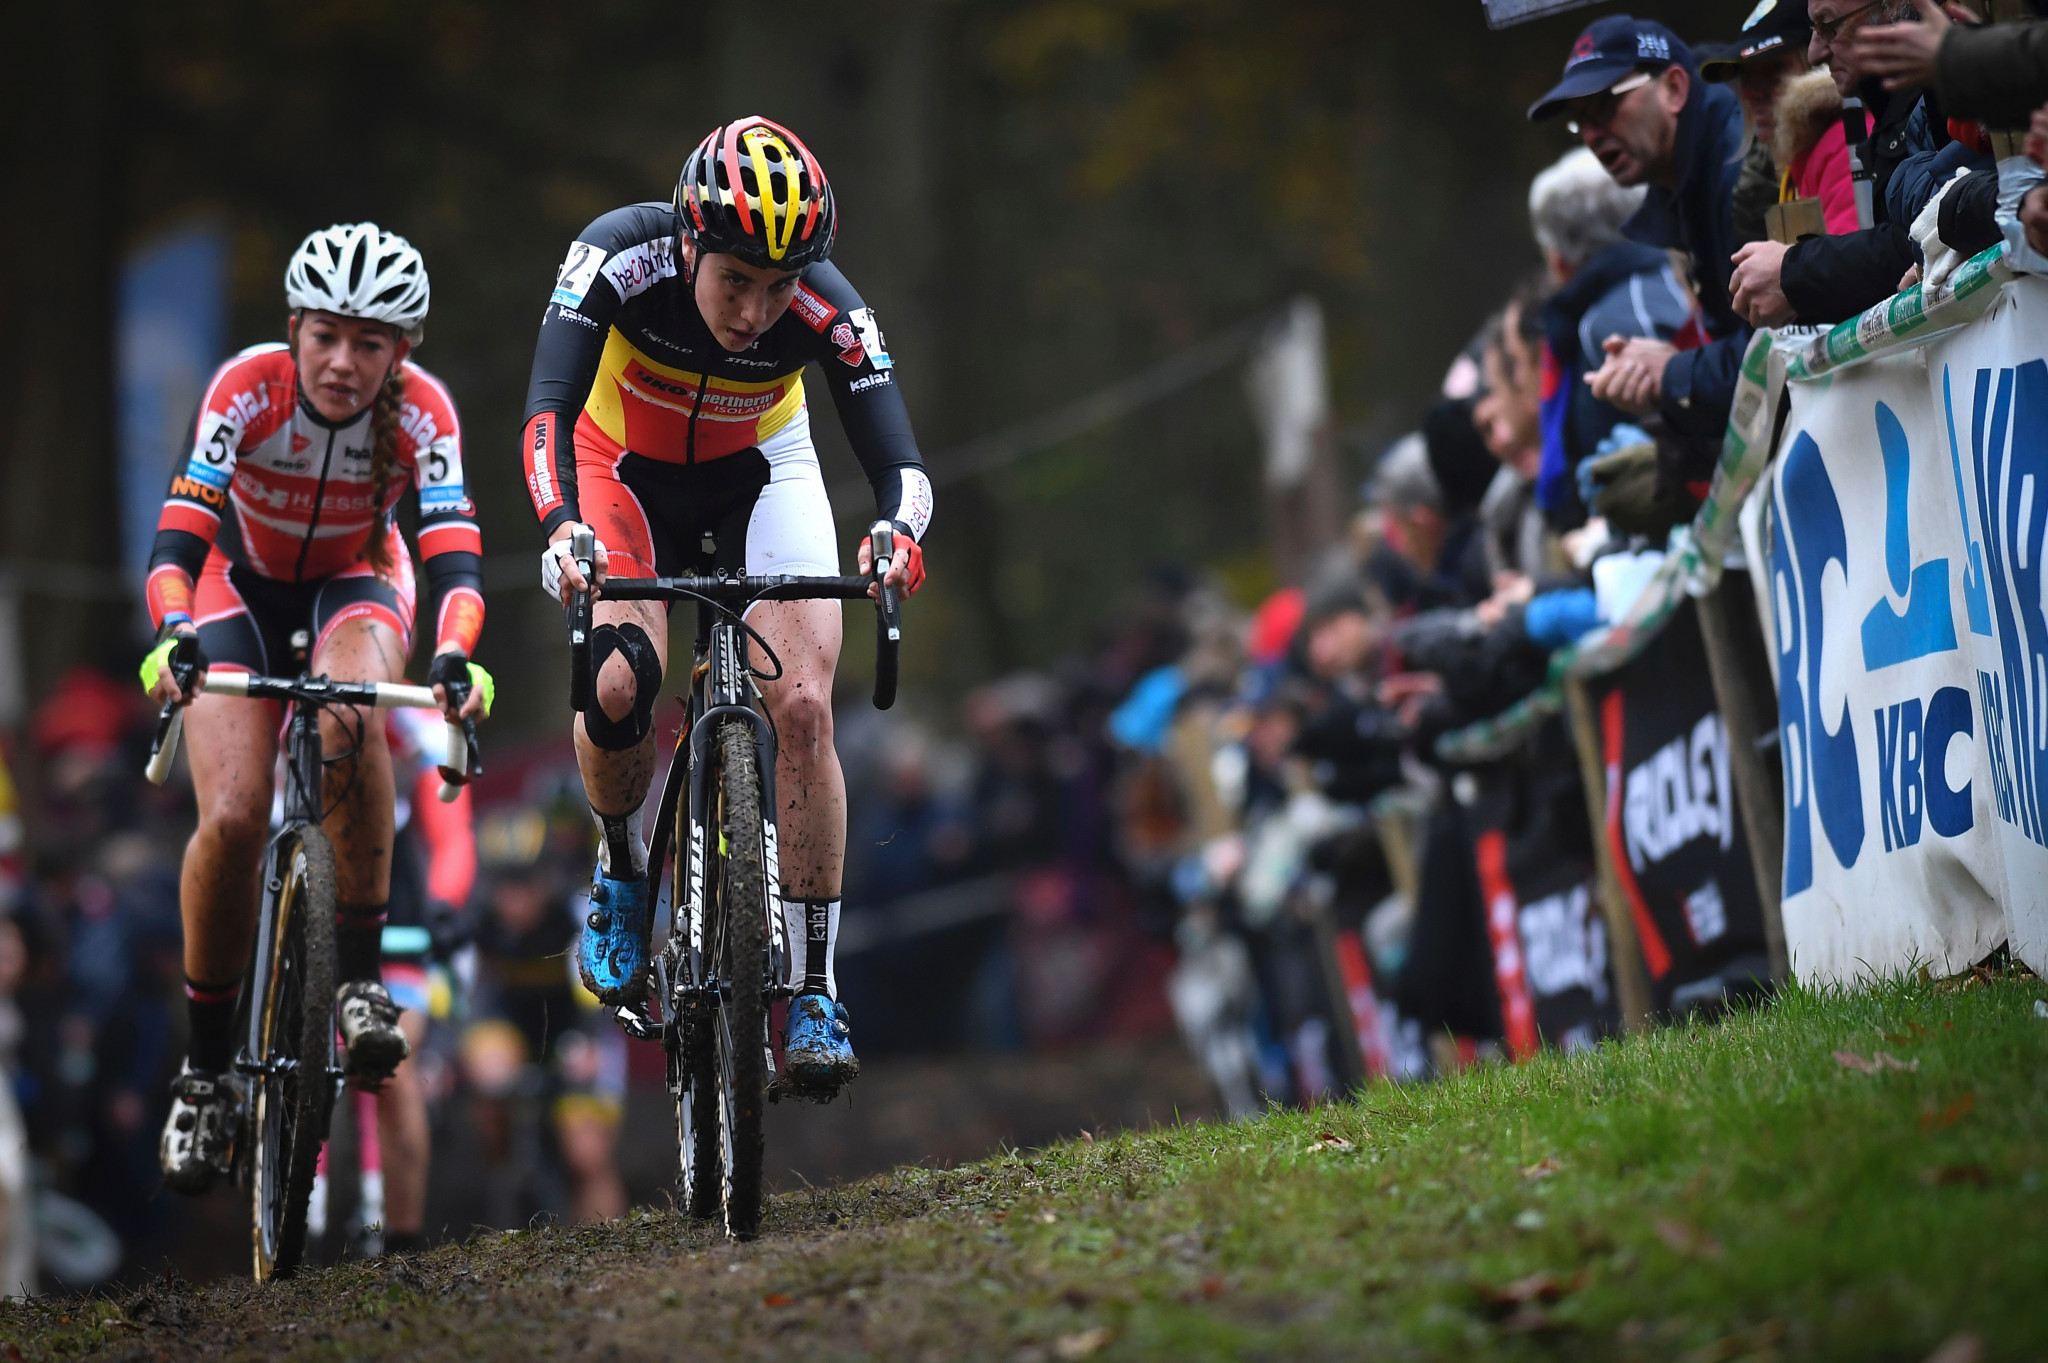 Cant earns third win of season at Cyclo-cross World Cup in Zeven